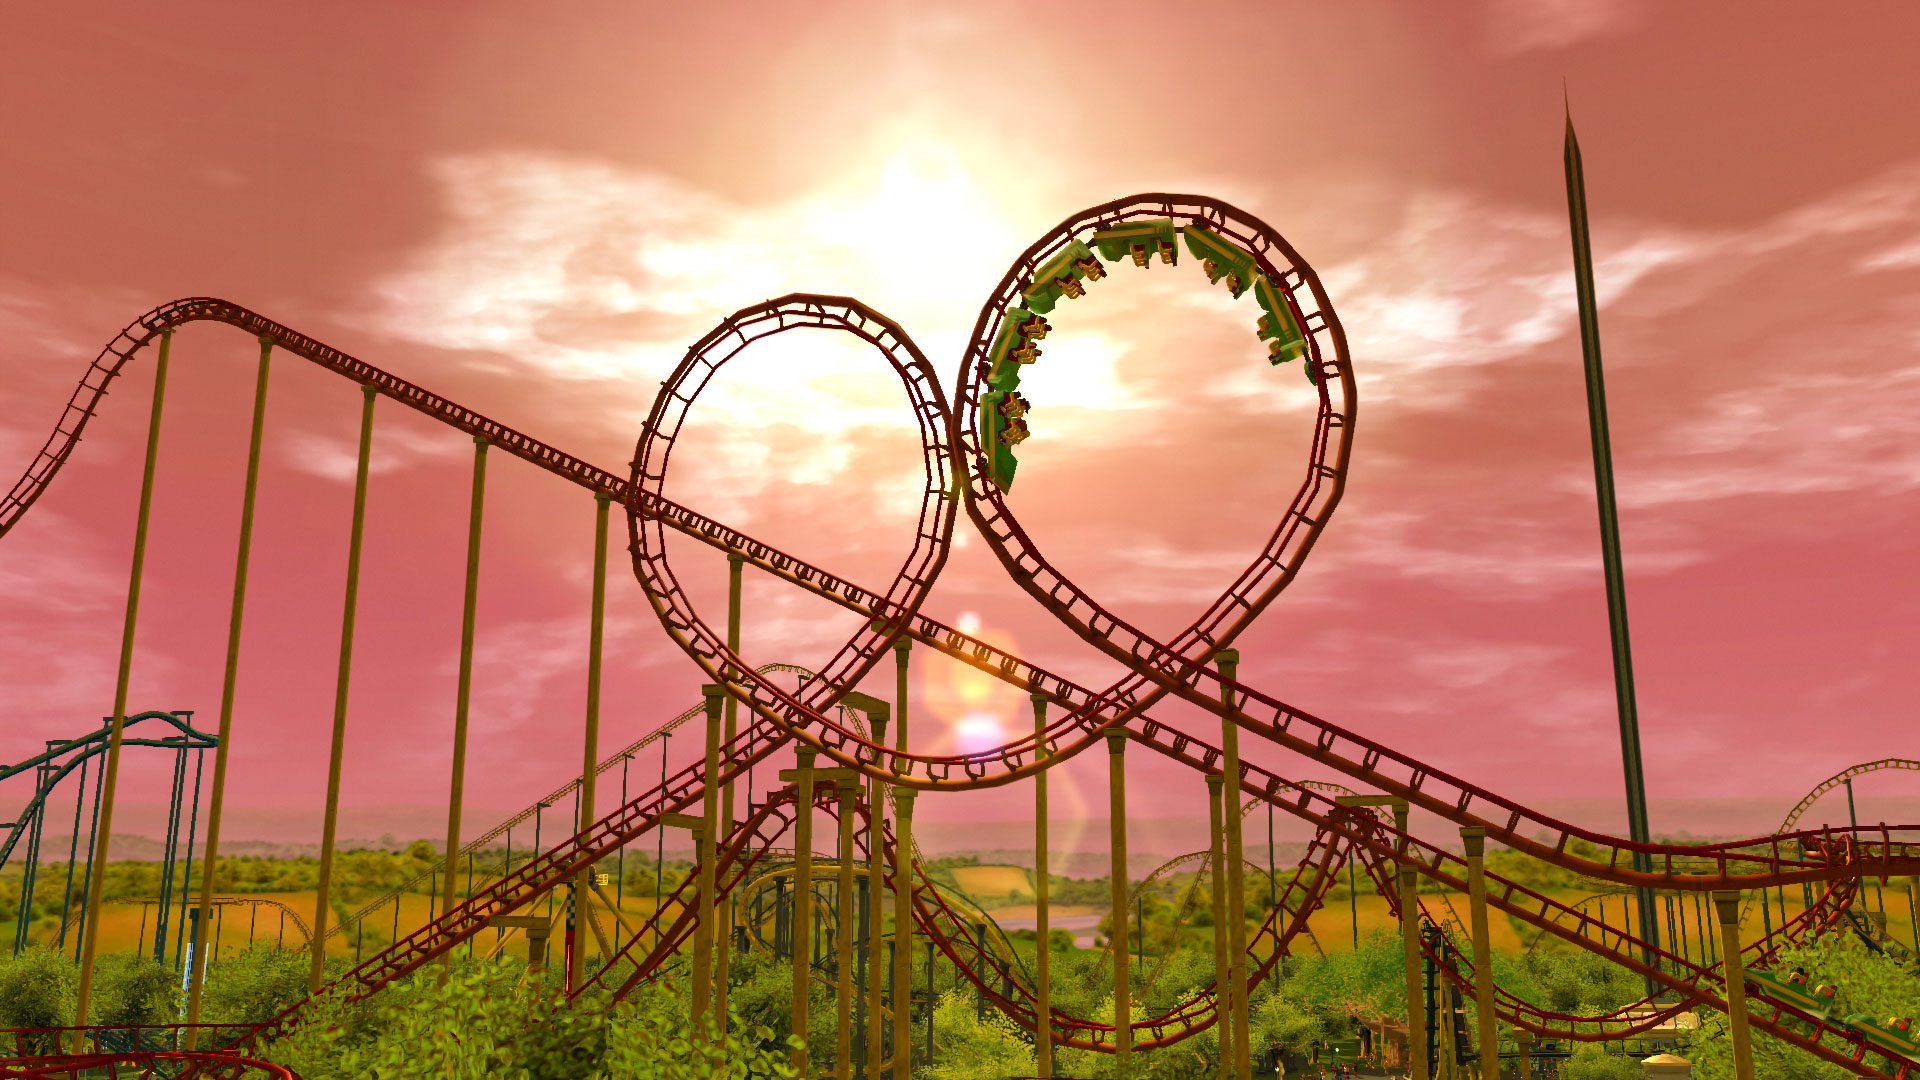 switch rollercoaster tycoon 3